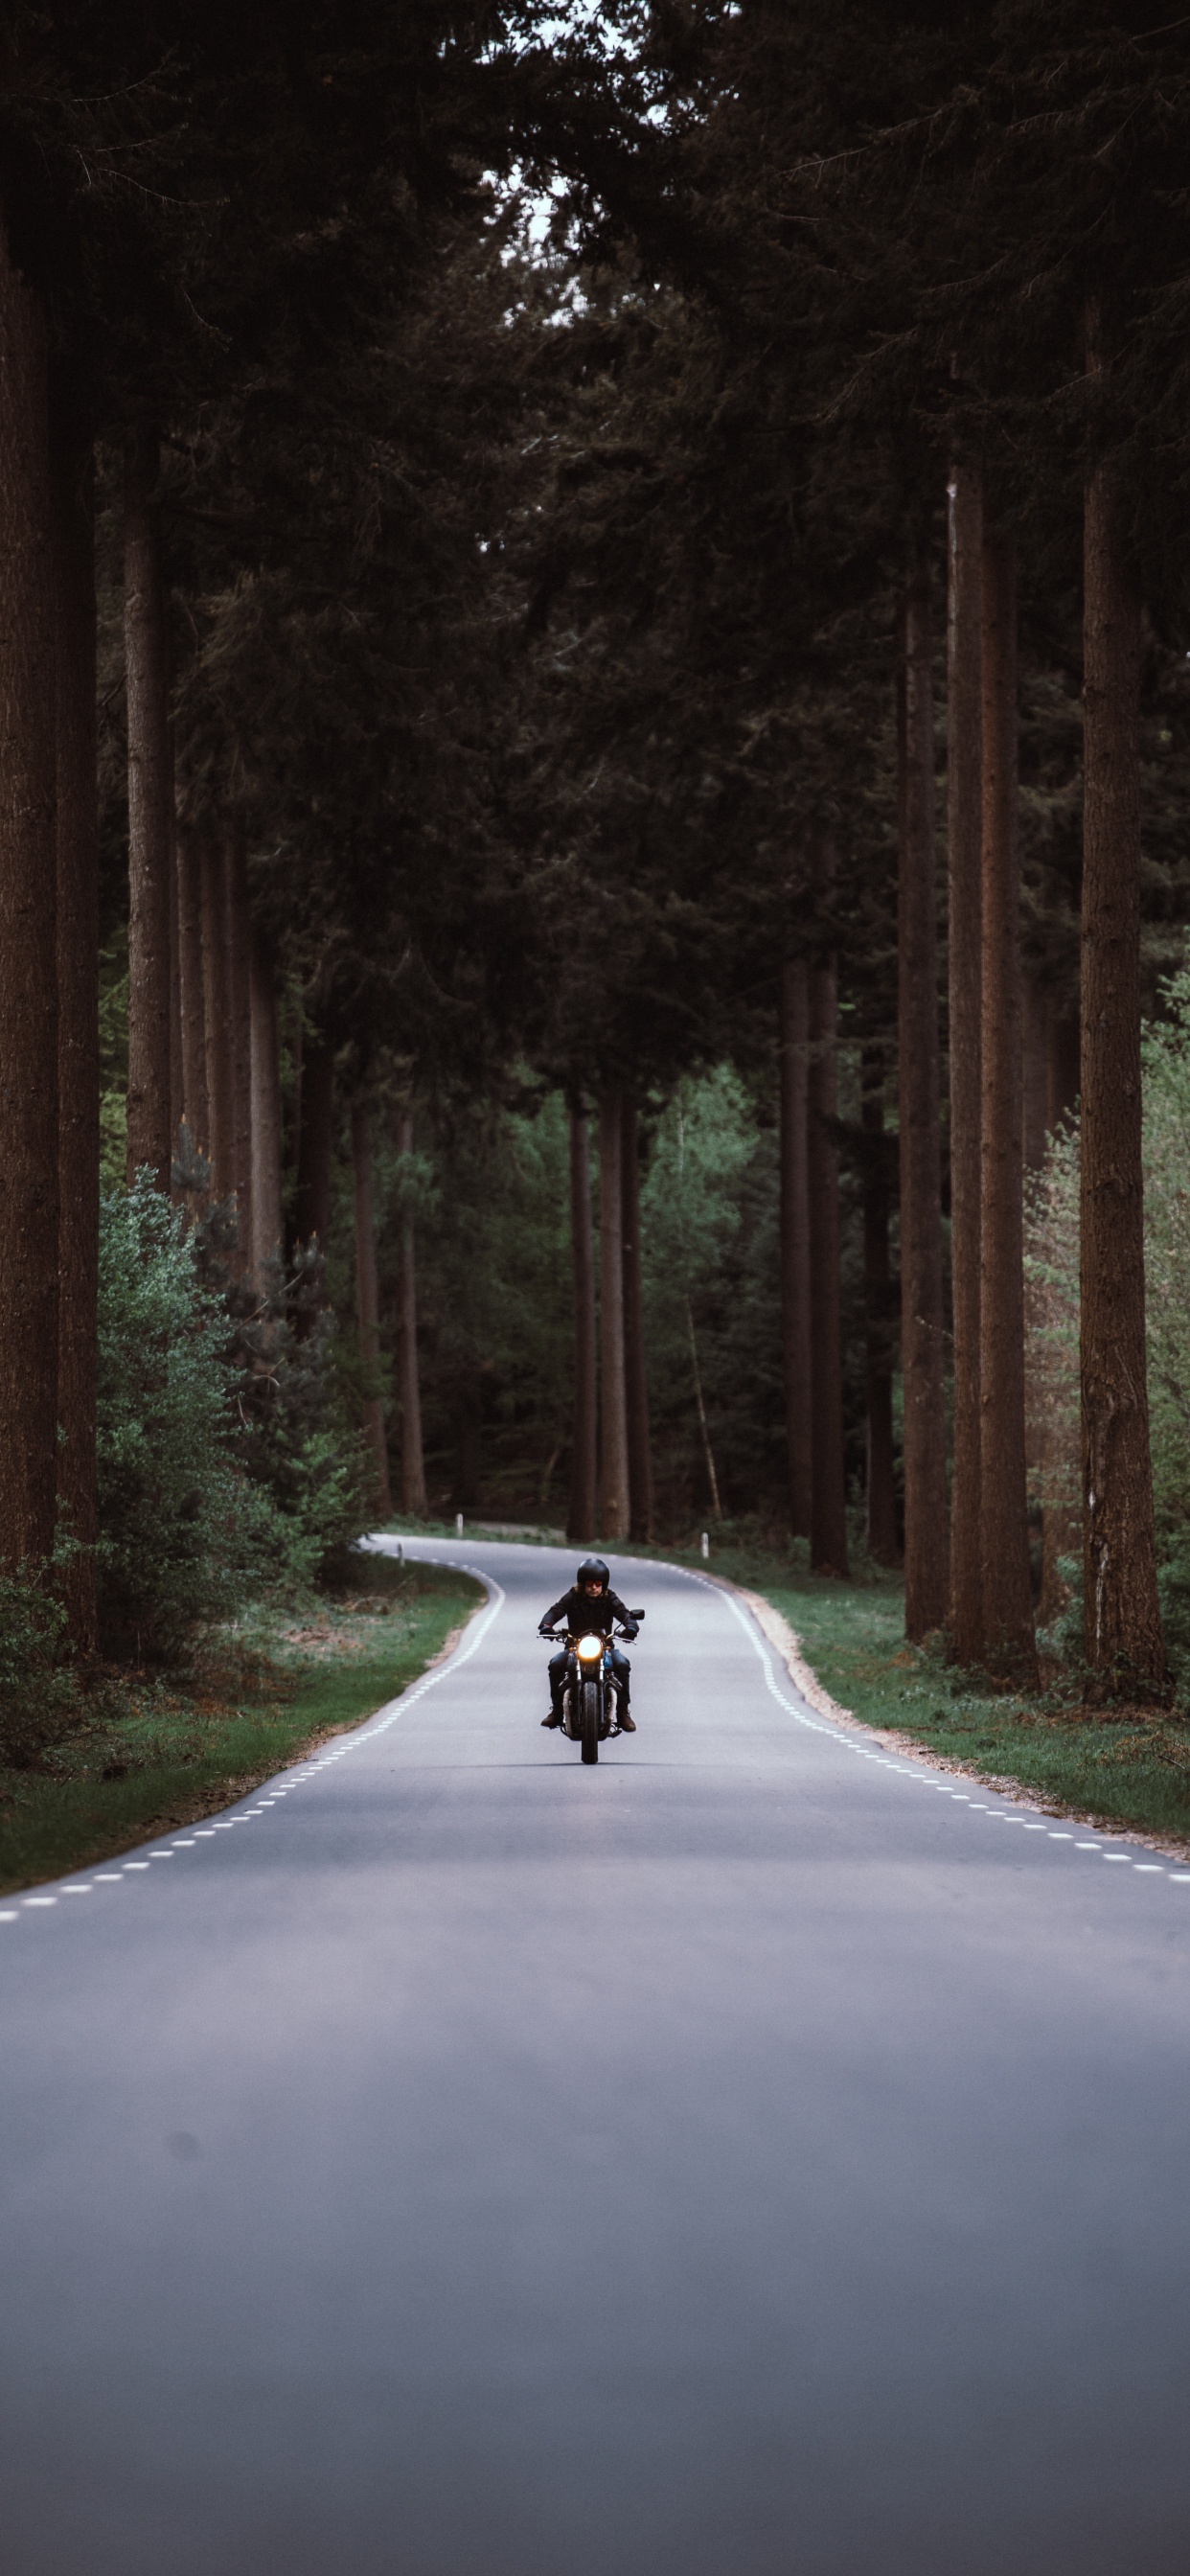 Person Riding Motorcycle on Road Between Trees During Daytime. Wallpaper in 1242x2688 Resolution